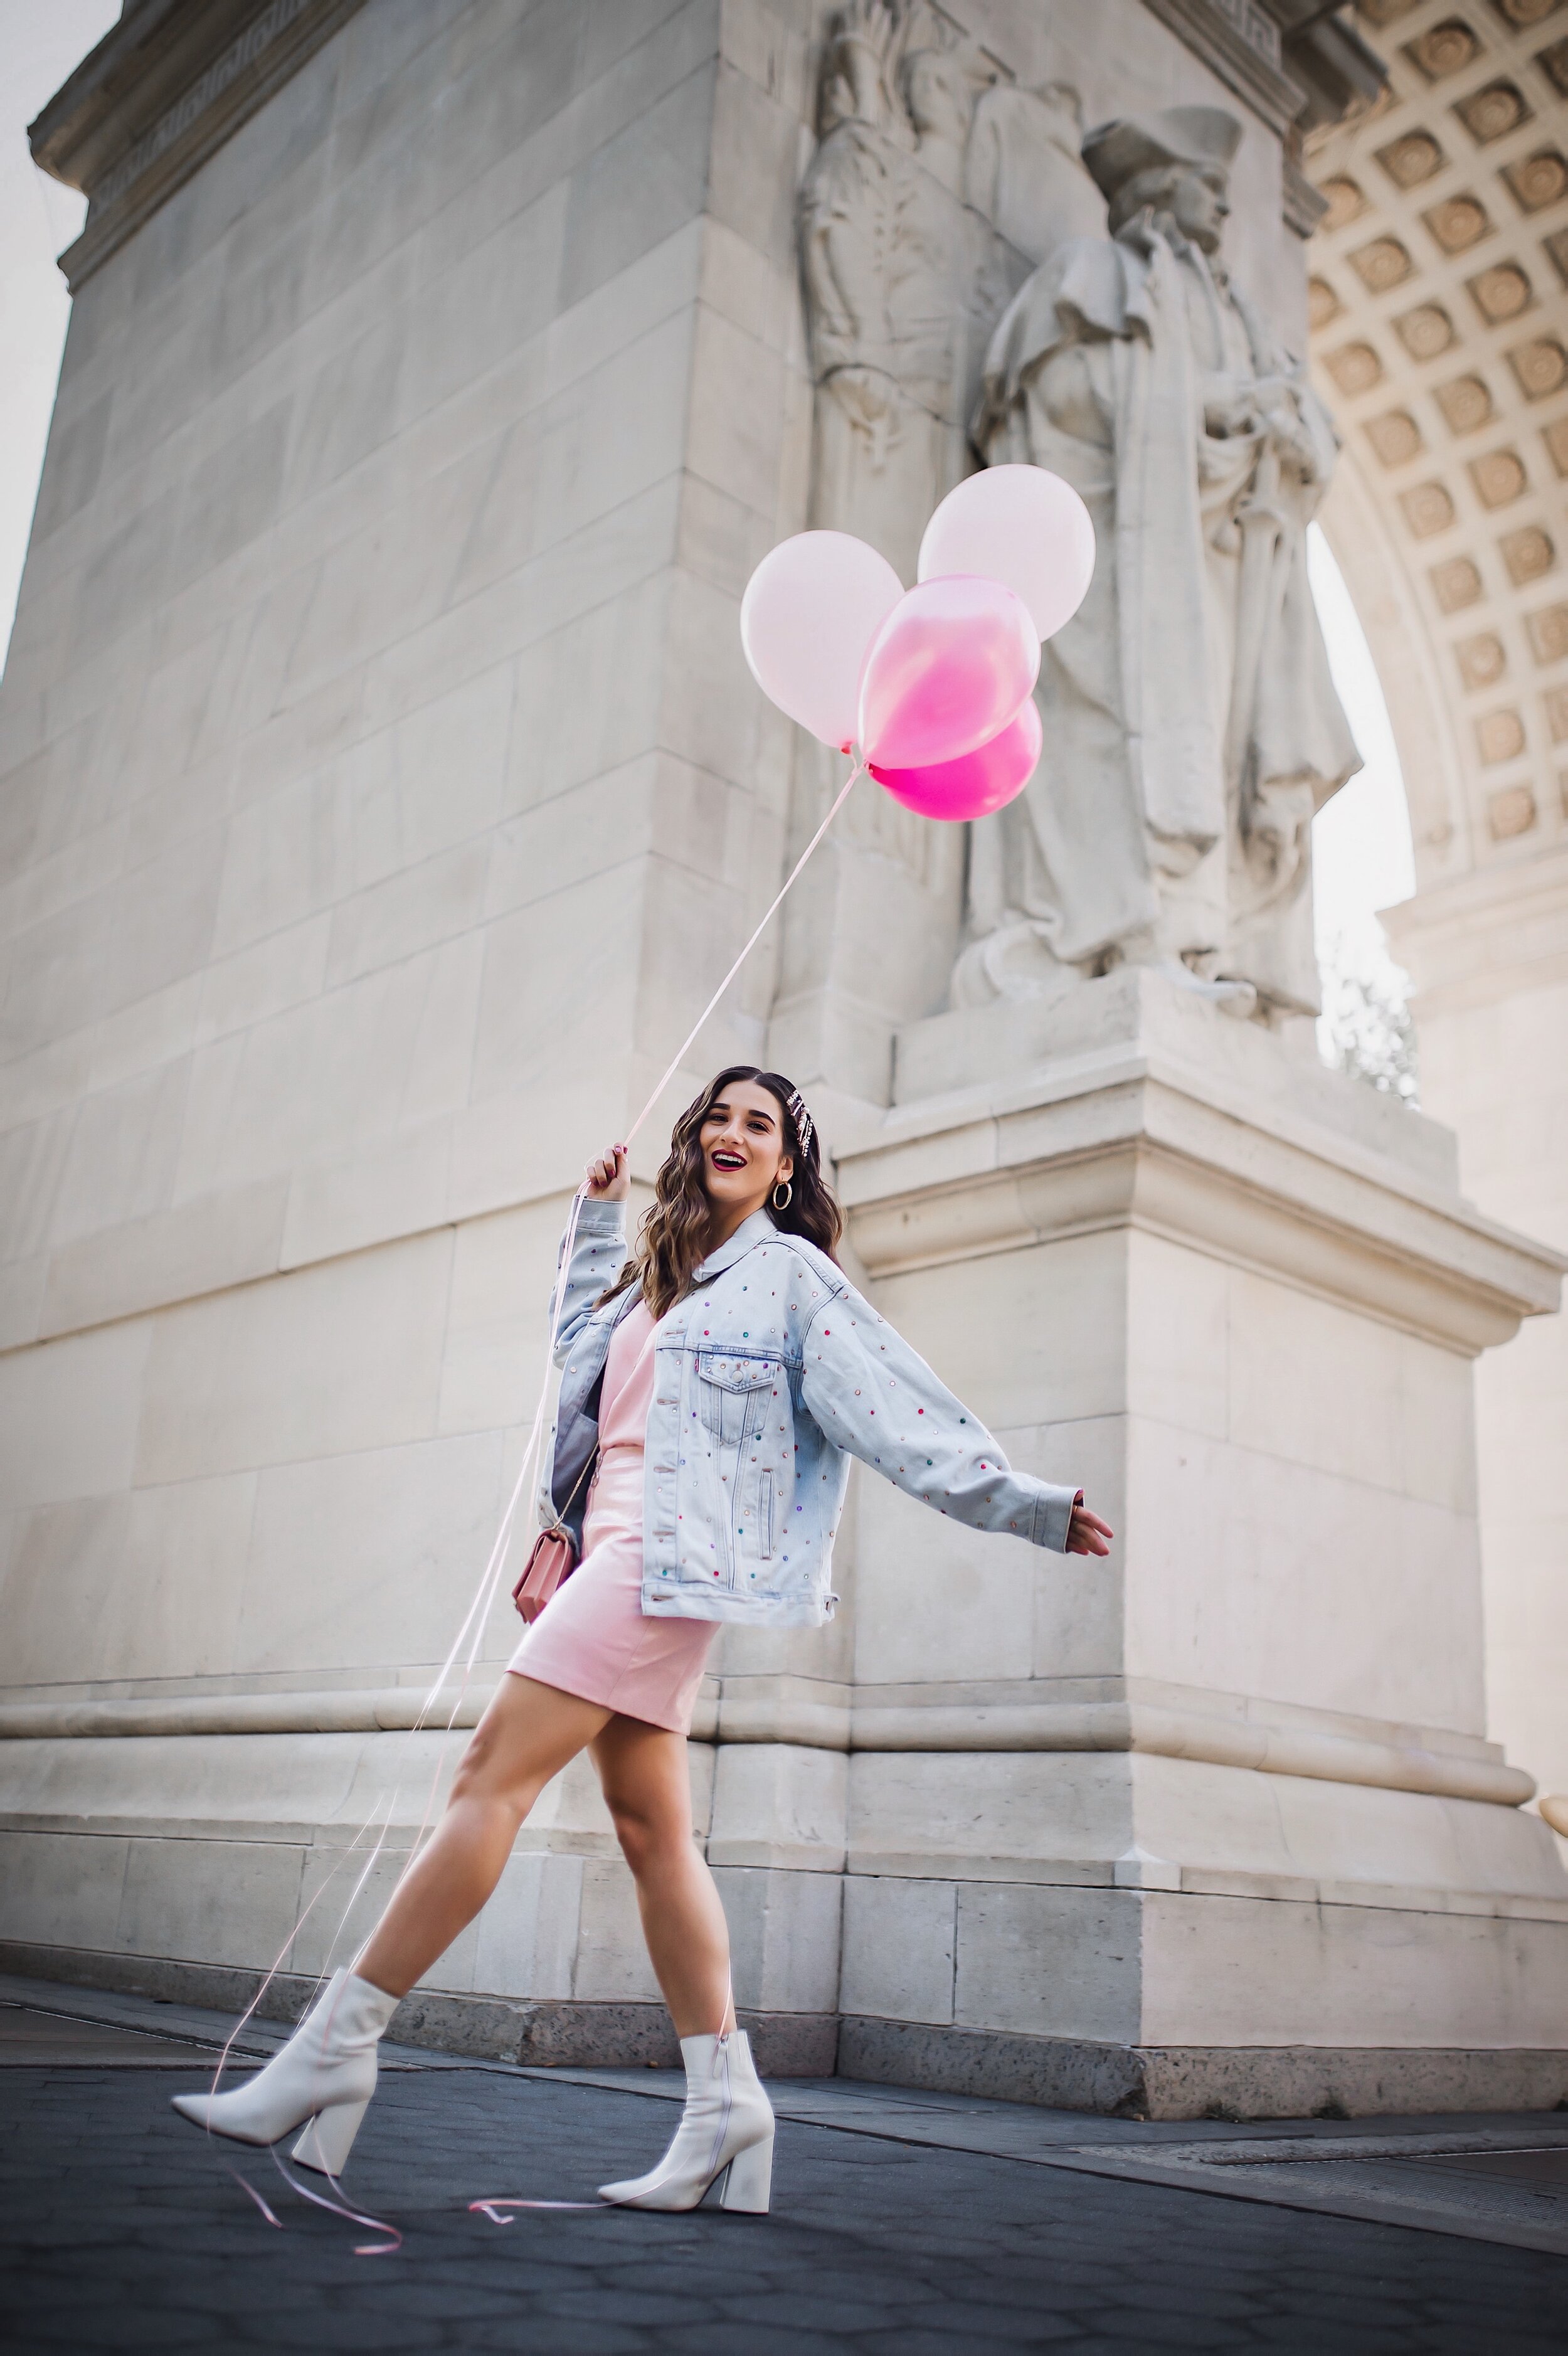 The Final Year Of My 20's Happy 29th Birthday Esther Santer NYC Street Style Blogger White Booties Trend Jeweled Jean Jacket Levis Denim Pink Balooons Leather Skirt Hair Clips Accessories Pastel Blue Shoes New Yoek City Inspo  Shoot Washington Square.JPG